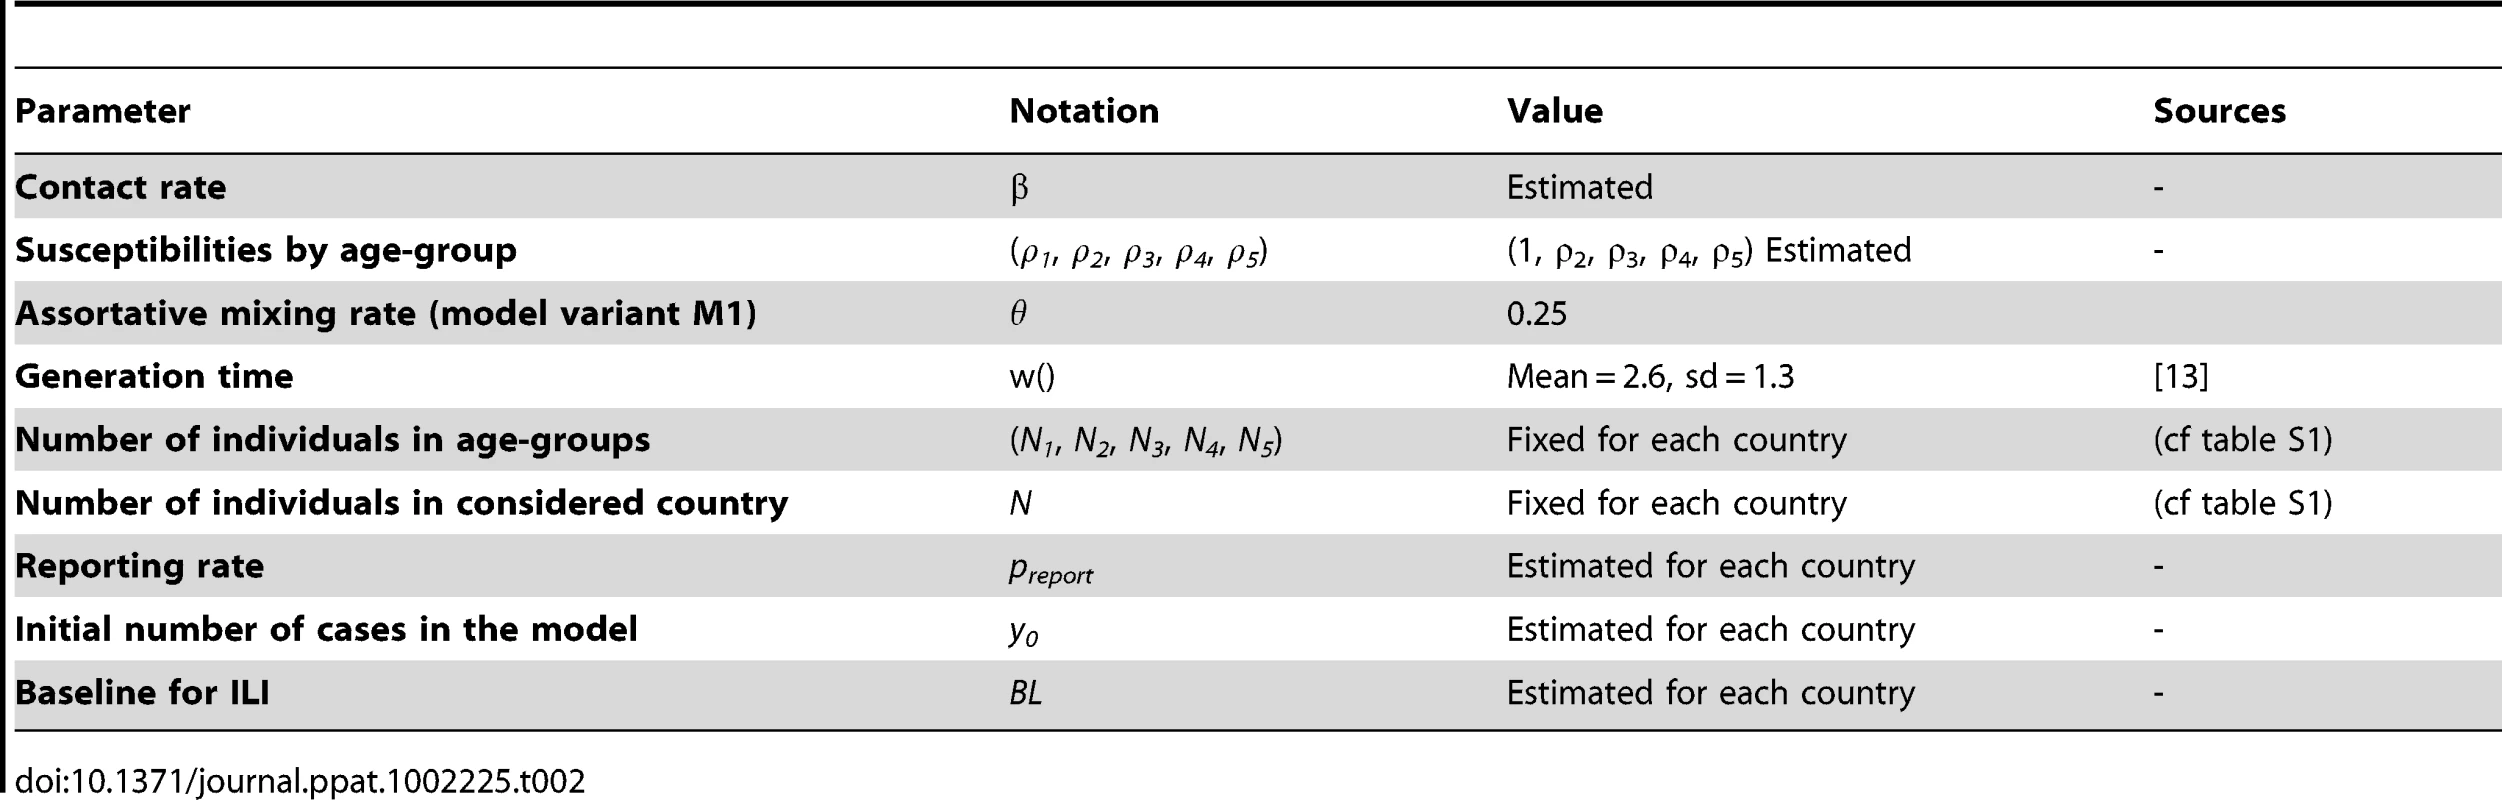 List of model parameters and their values.